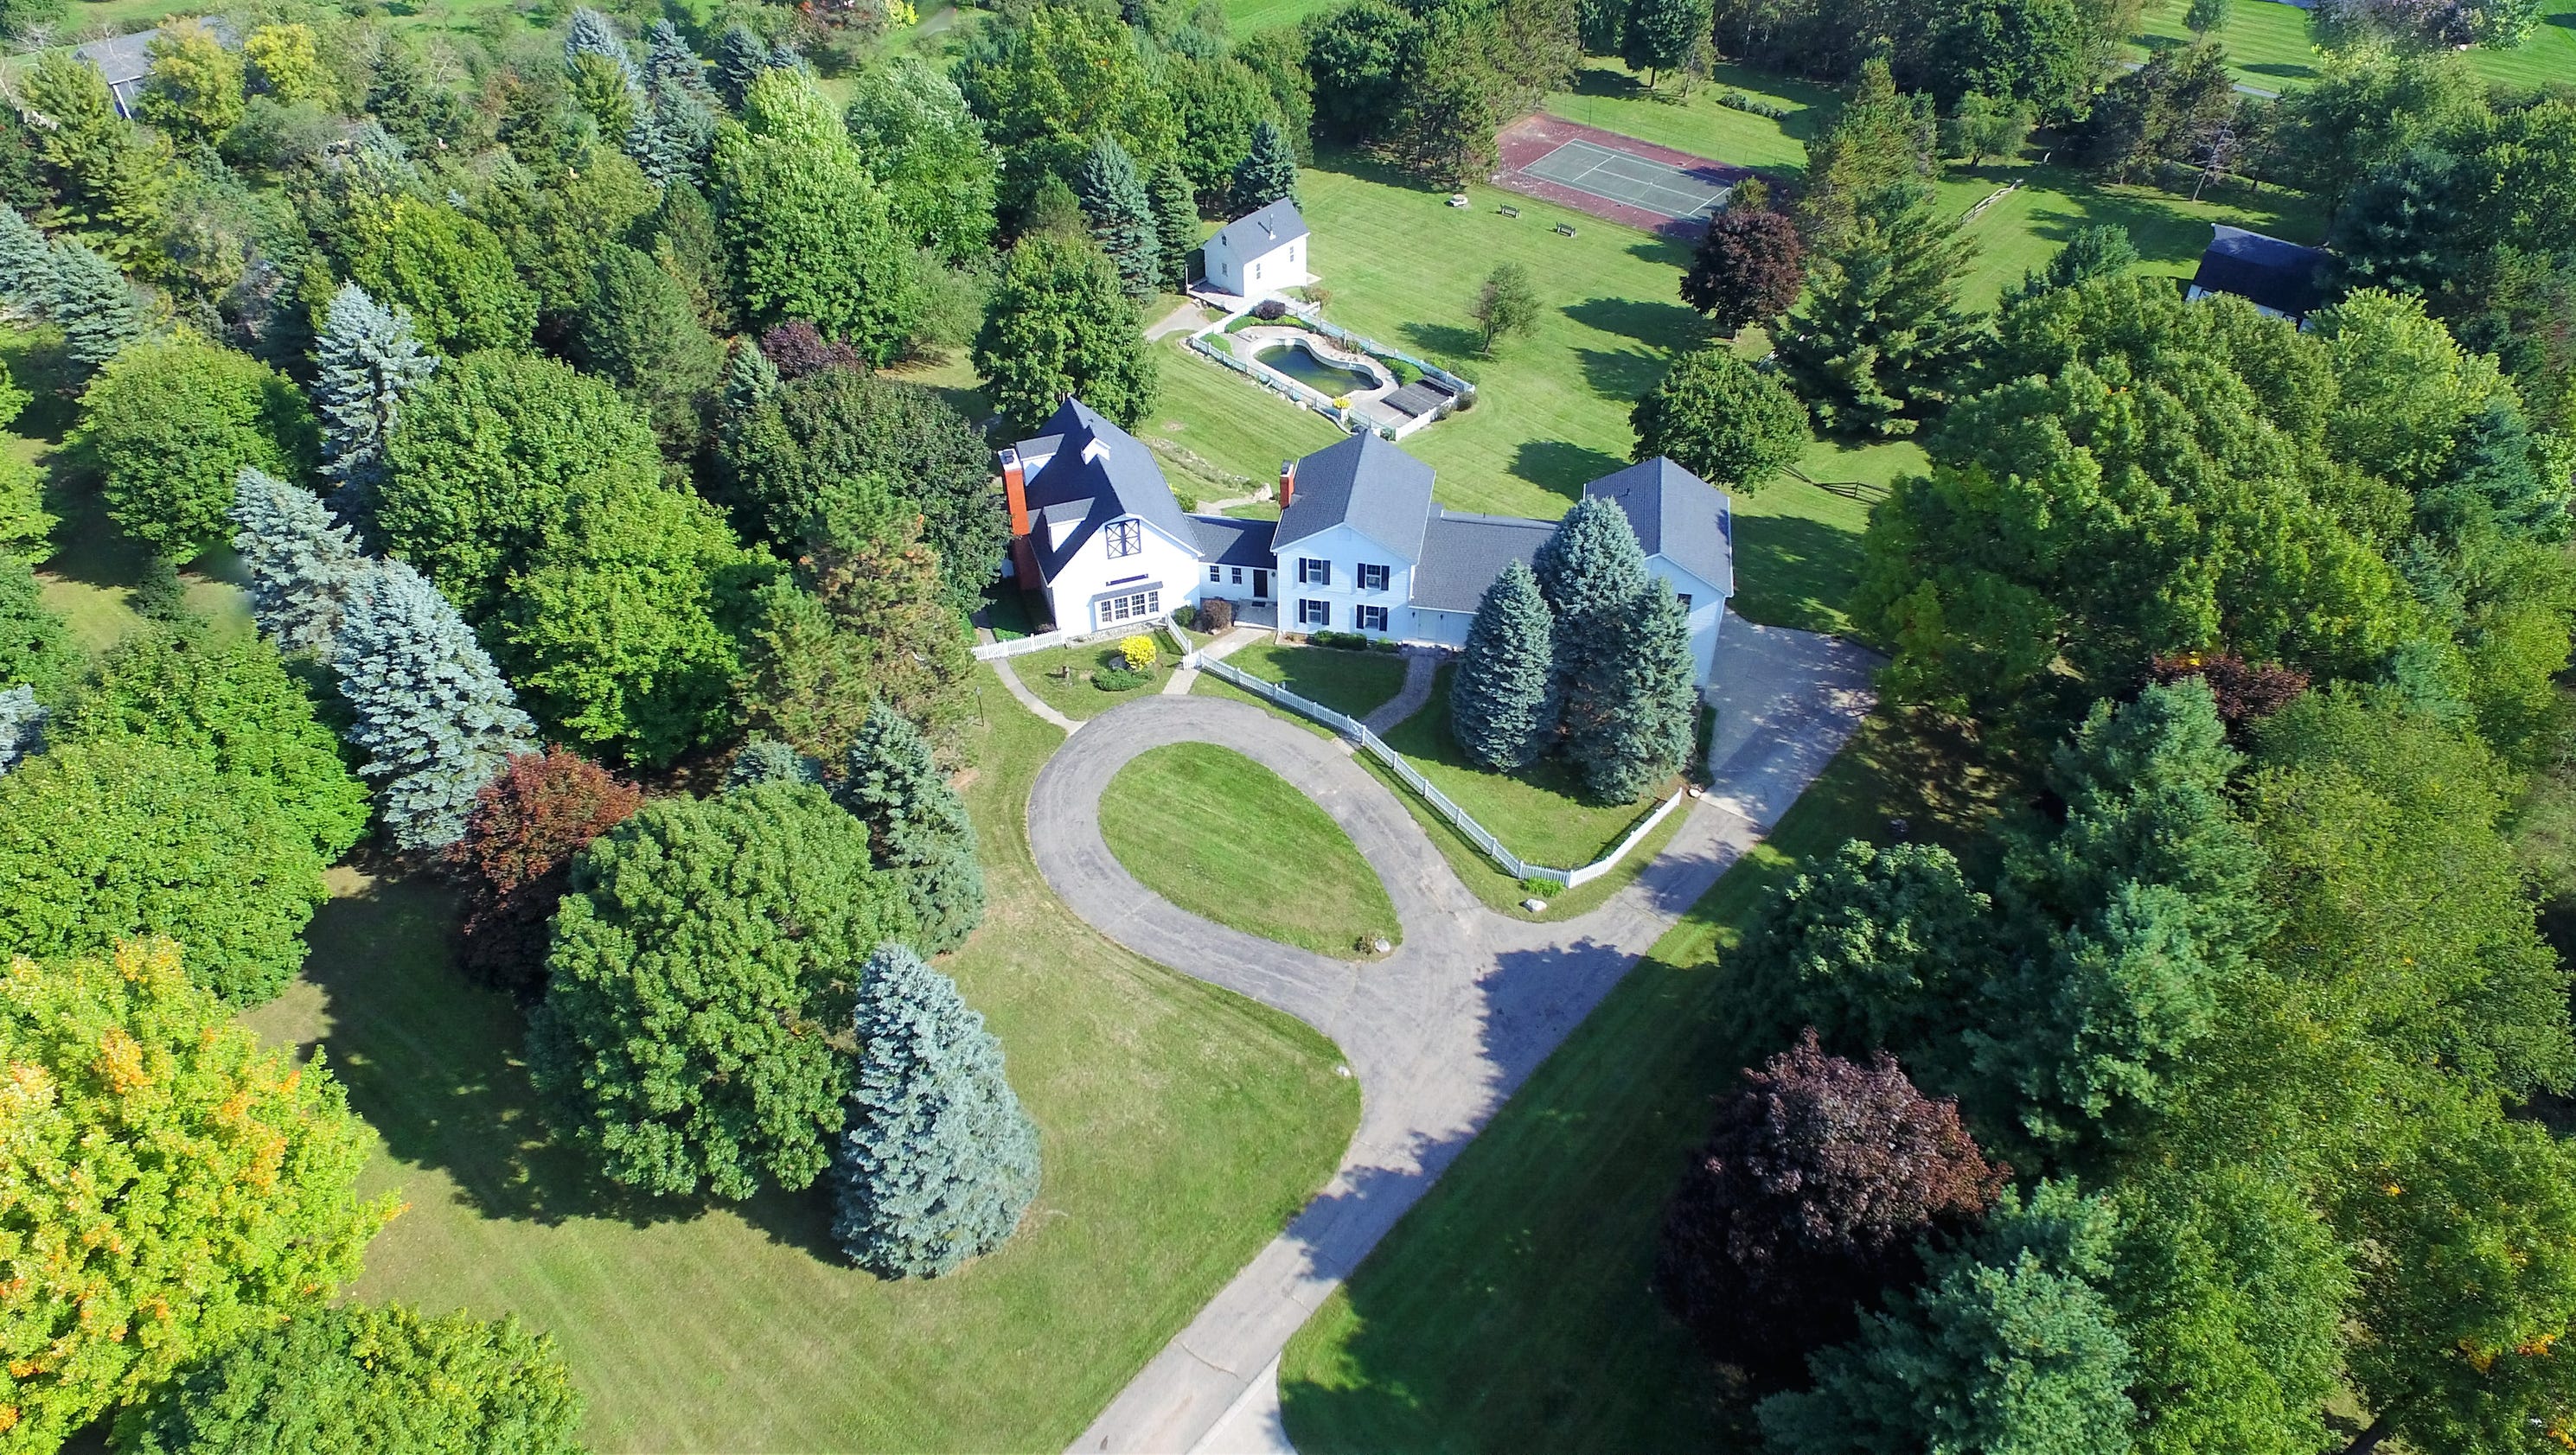 Kid Rock's posh childhood home listed in Macomb County for $1.3M3200 x 1680